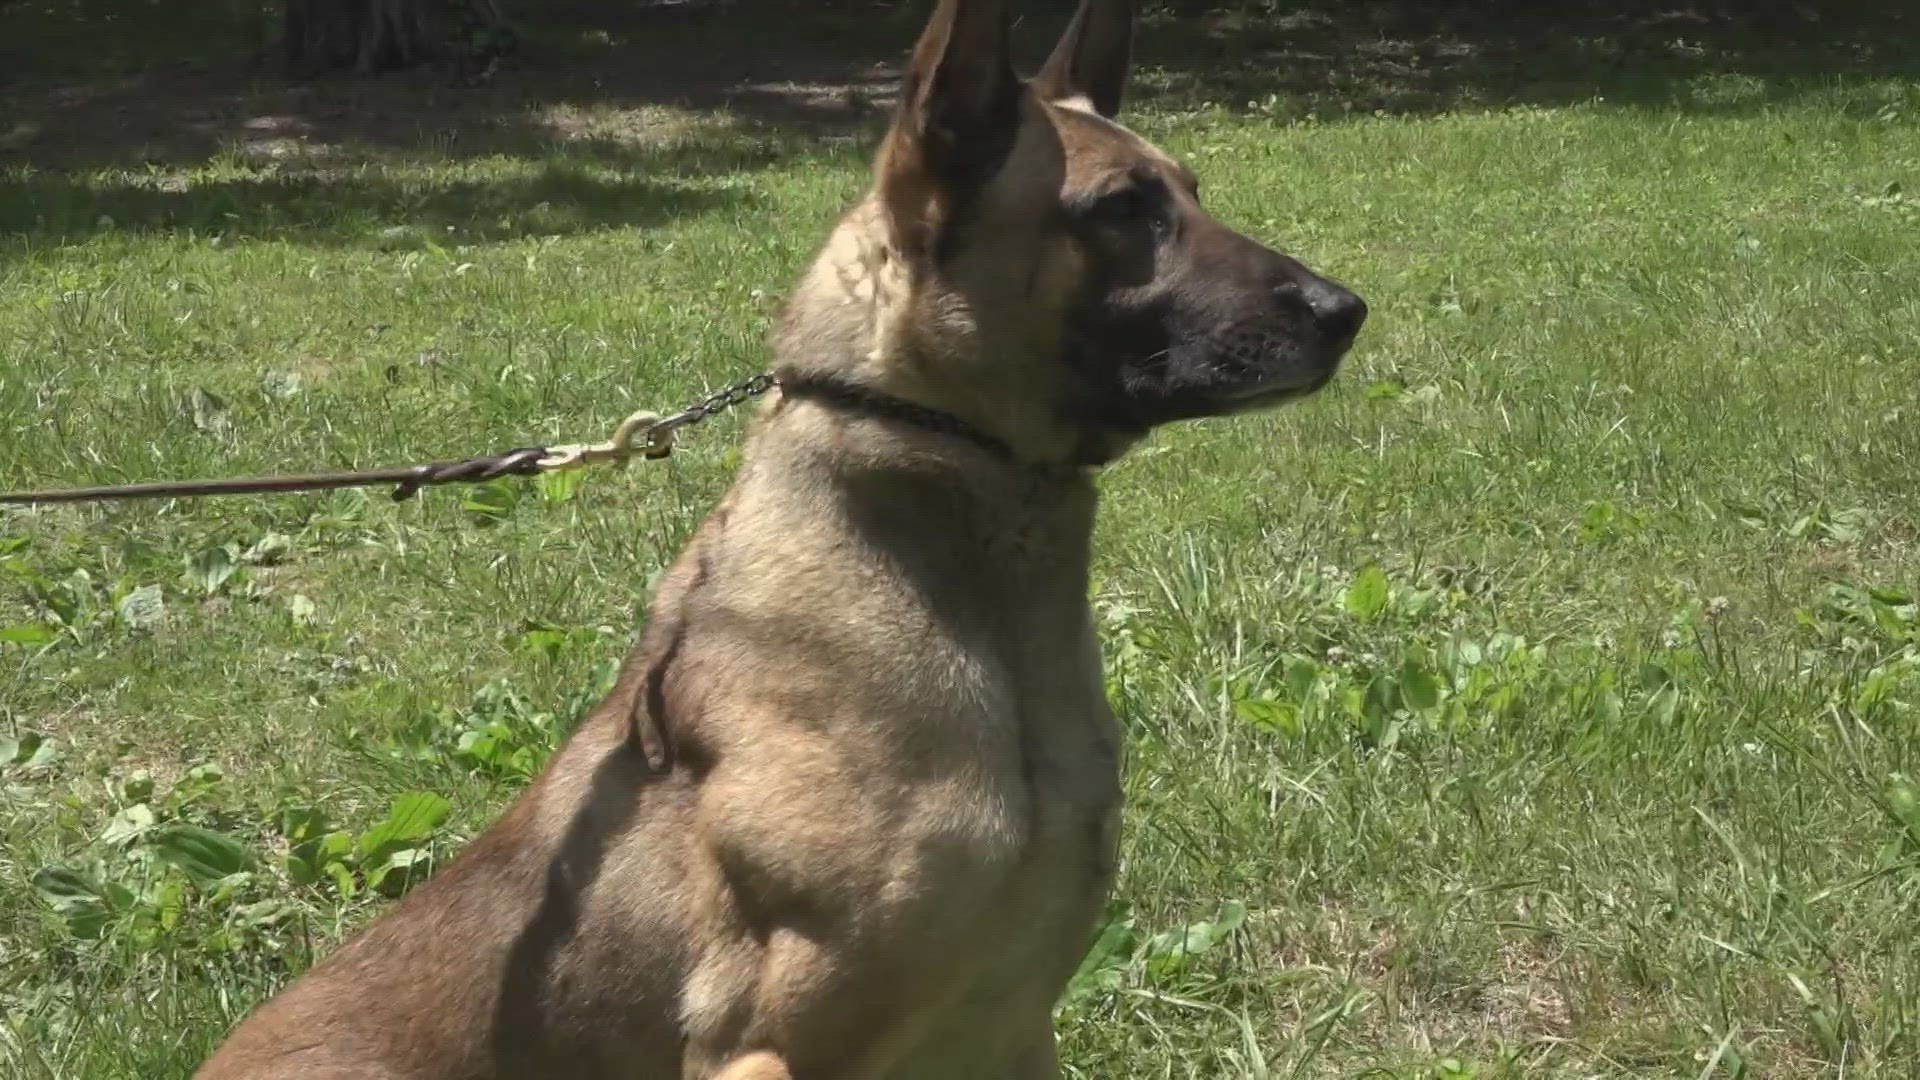 The sheriff’s office said it needs better equipment so the K9s can do their jobs more effectively.